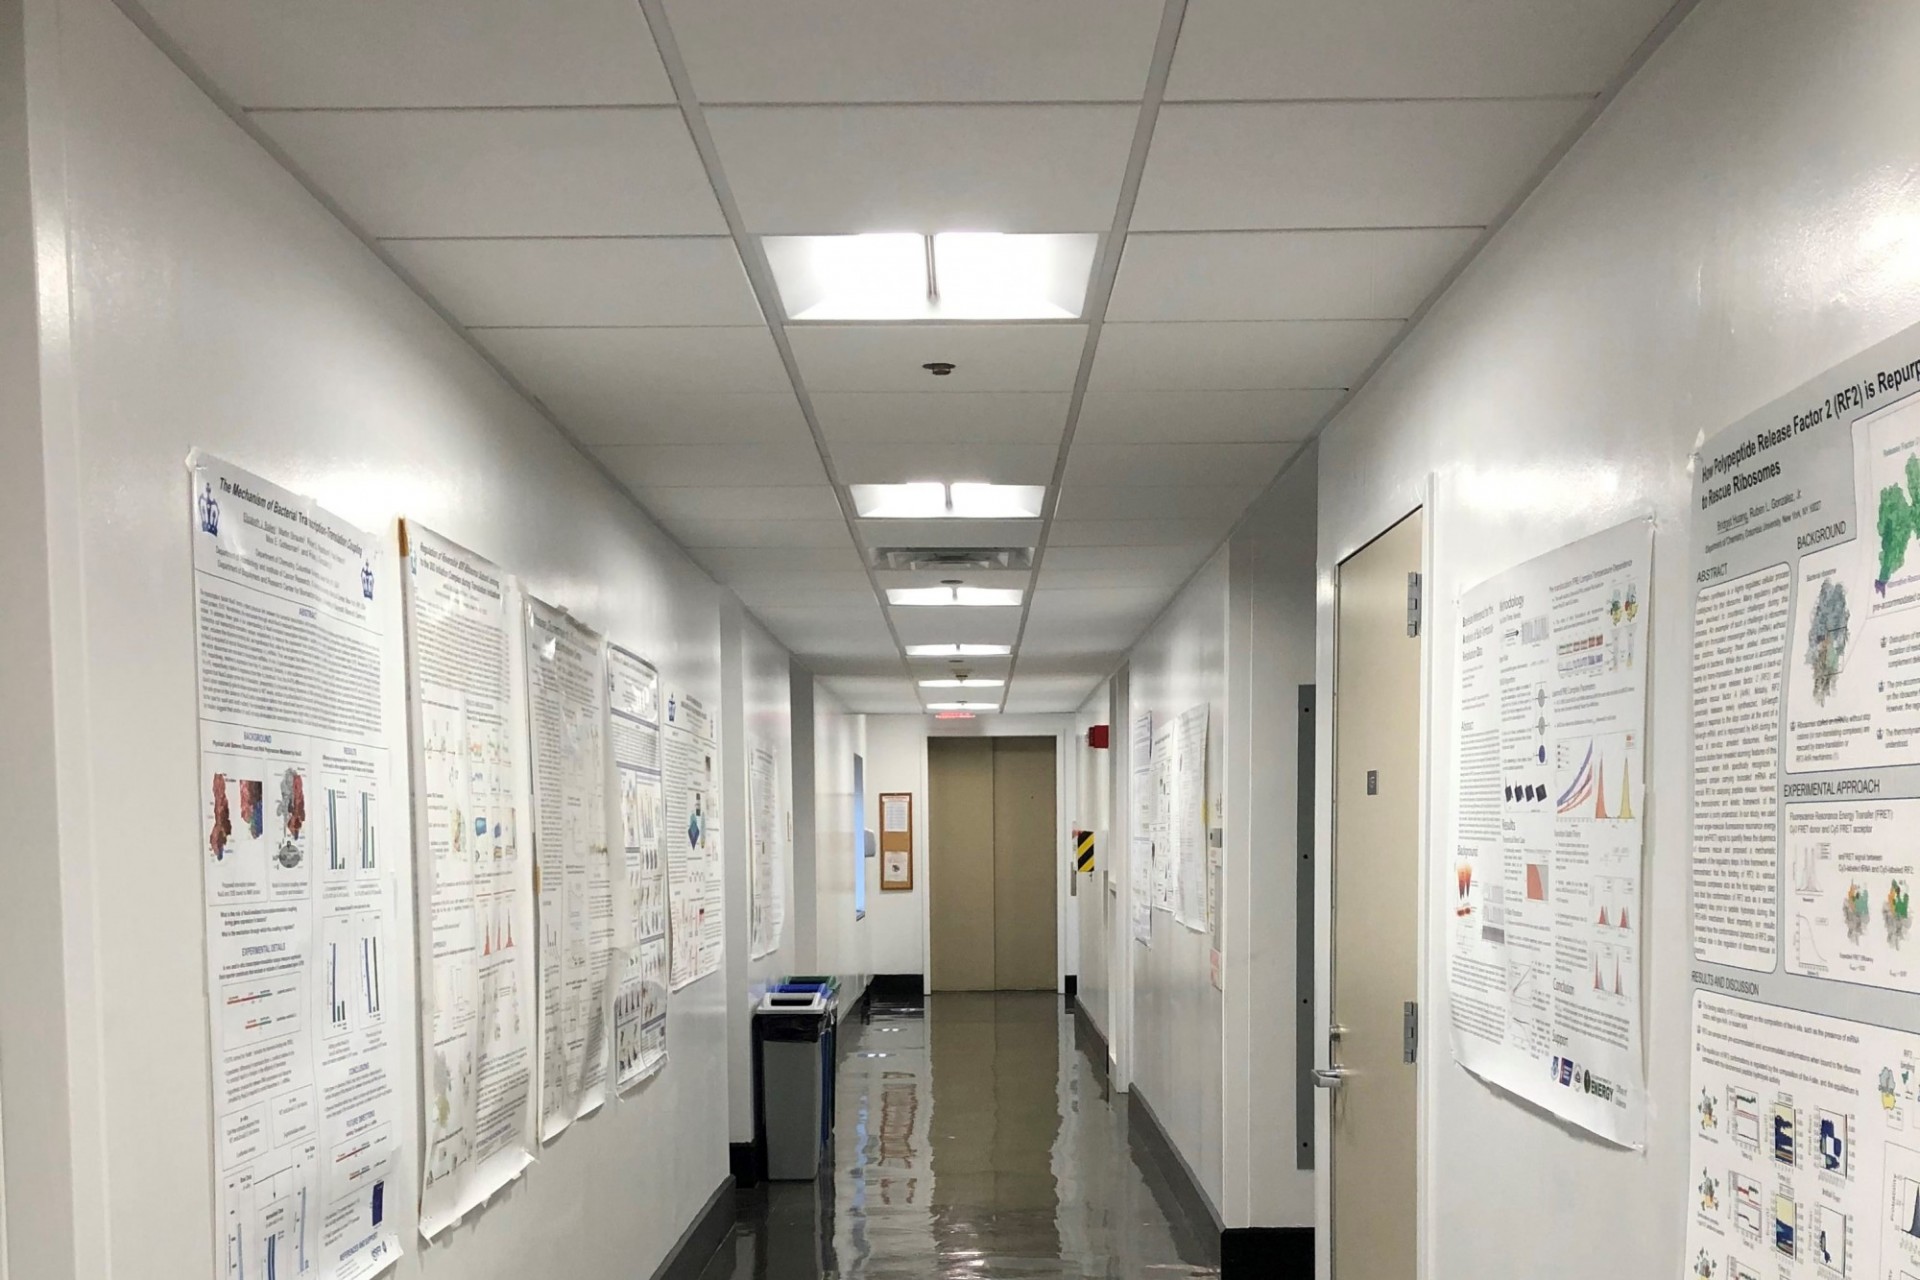 A hallway in Havemeyer hall that is painted white and has new LED lighting installed in the ceiling.